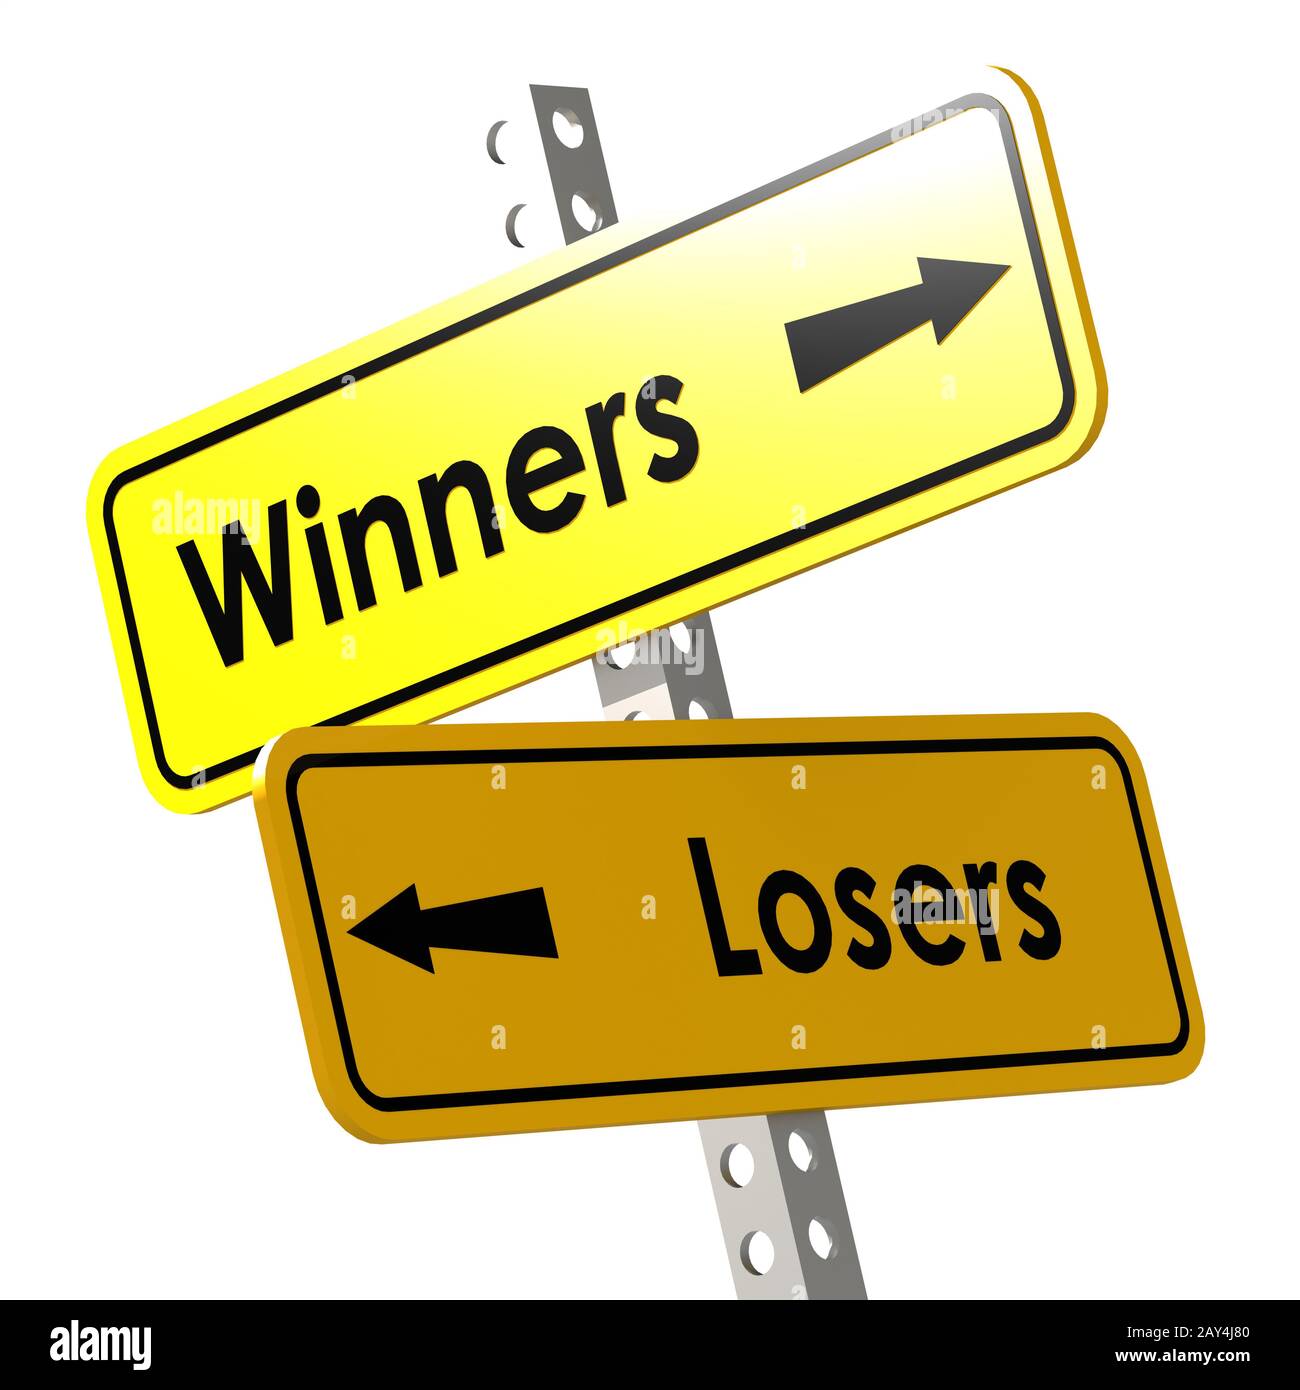 Winners and losers with yellow road sign Stock Photo